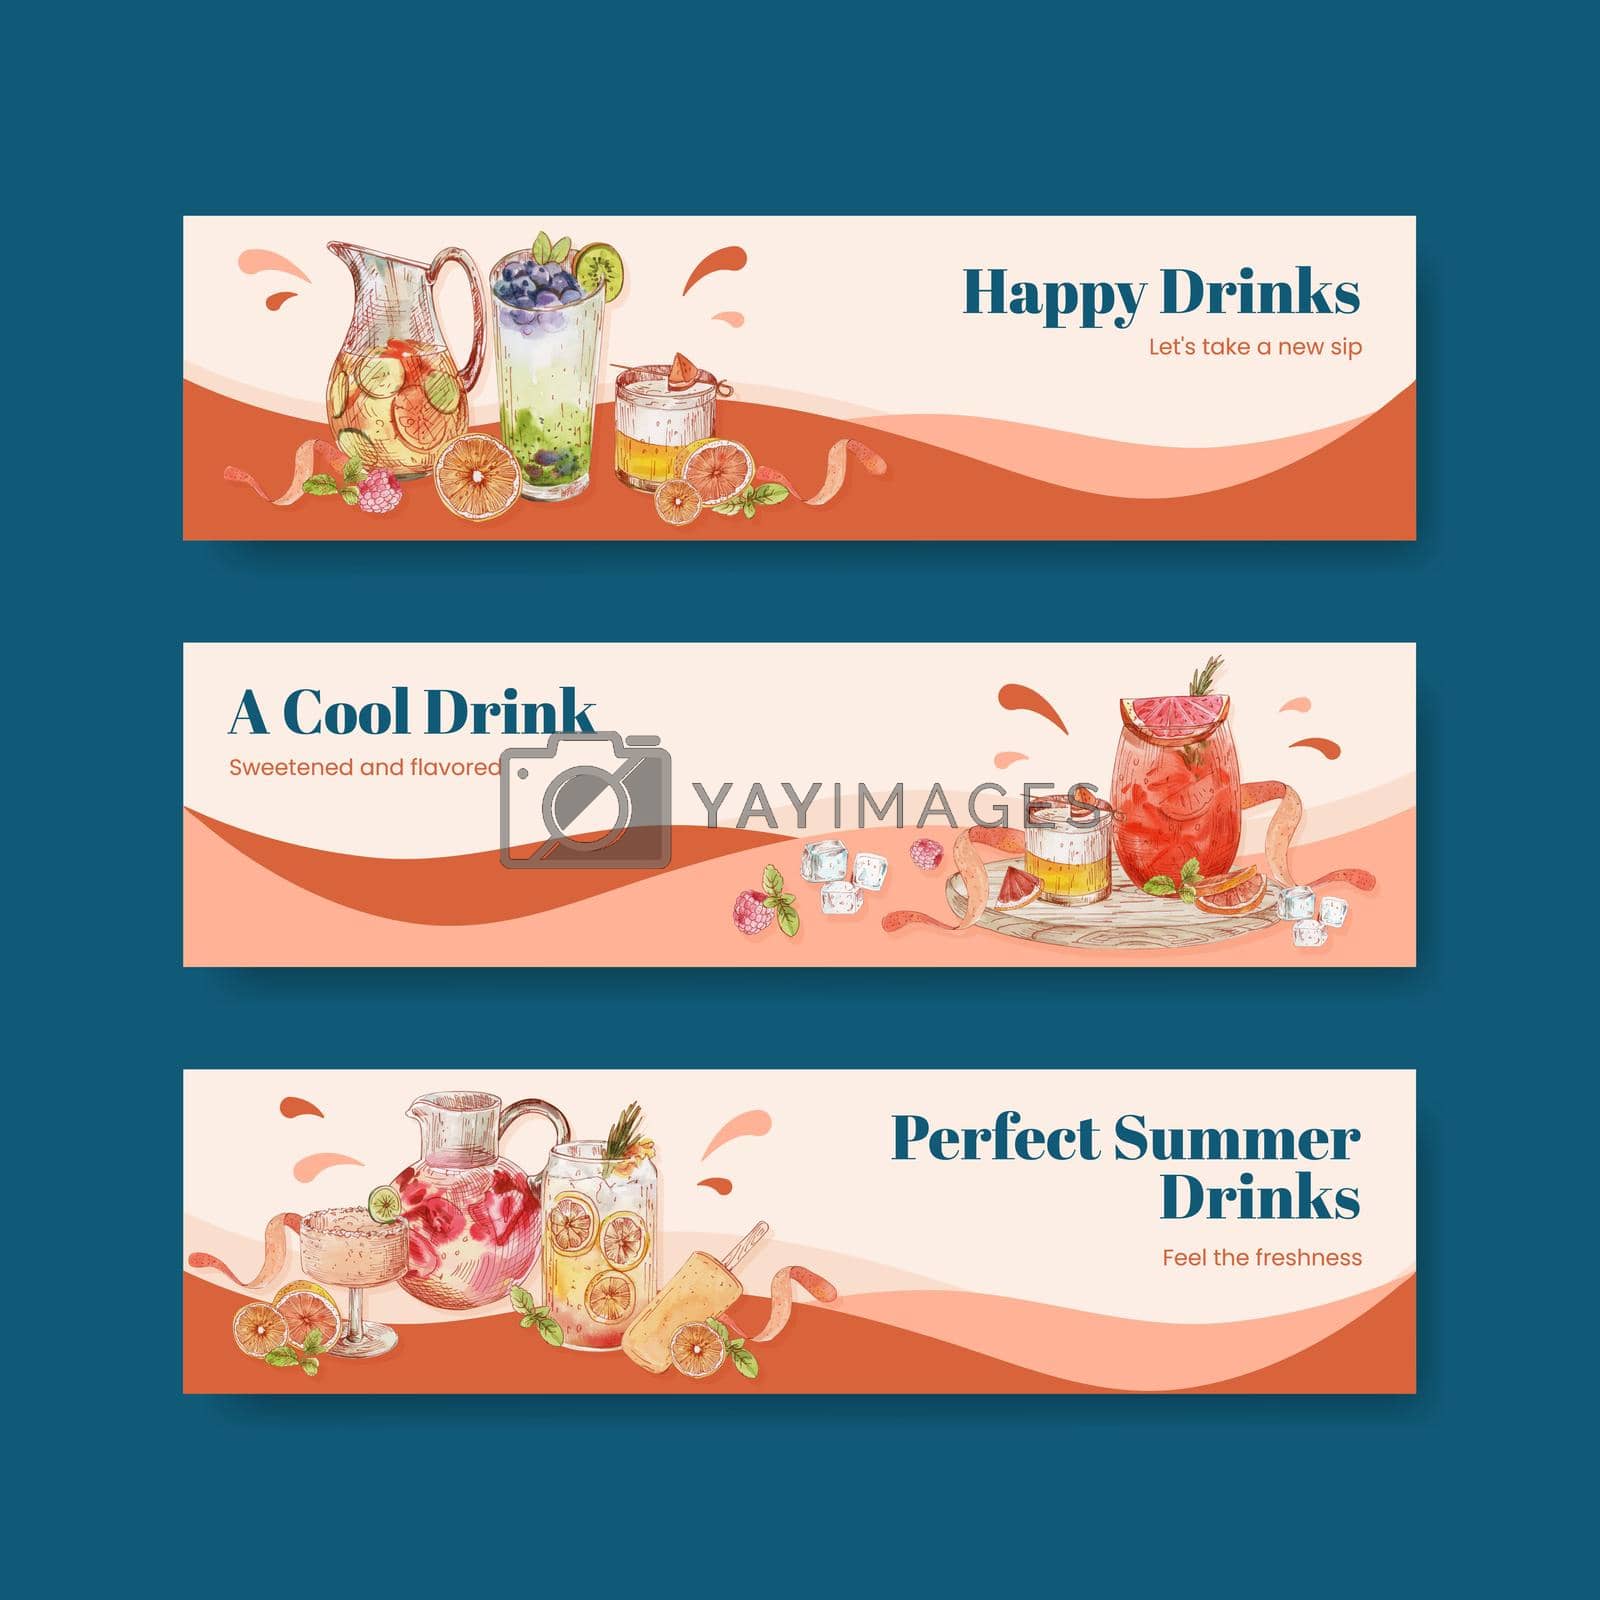 Royalty free image of Banner template with refreshment drinks concept,watercolor style by Photographeeasia